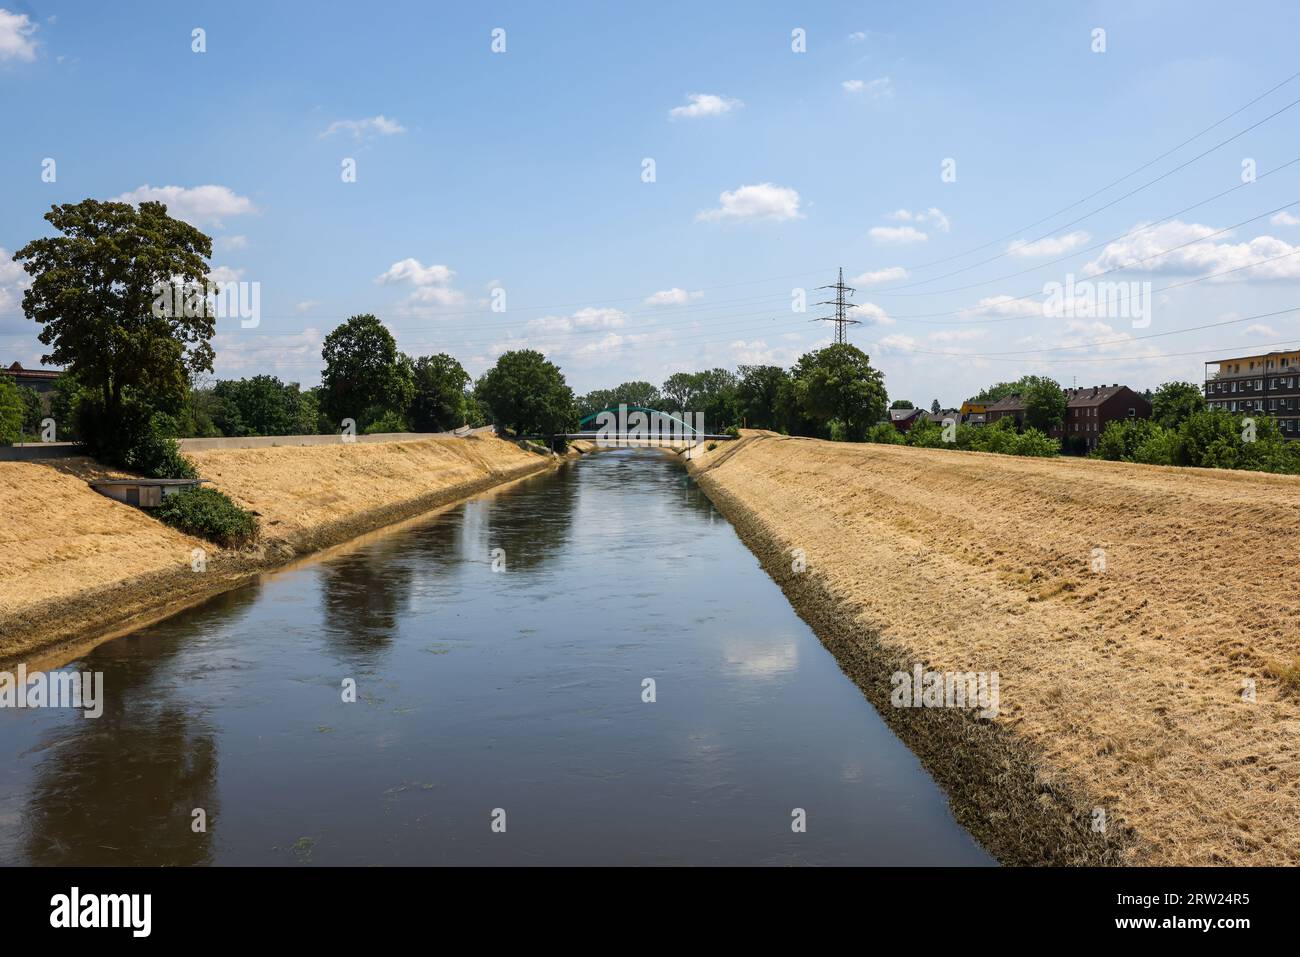 23.06.2023, Germany, North Rhine-Westphalia, Oberhausen - Renaturation of the Emscher in the Holtener Bruch. The currently straightened Emscher, shown Stock Photo